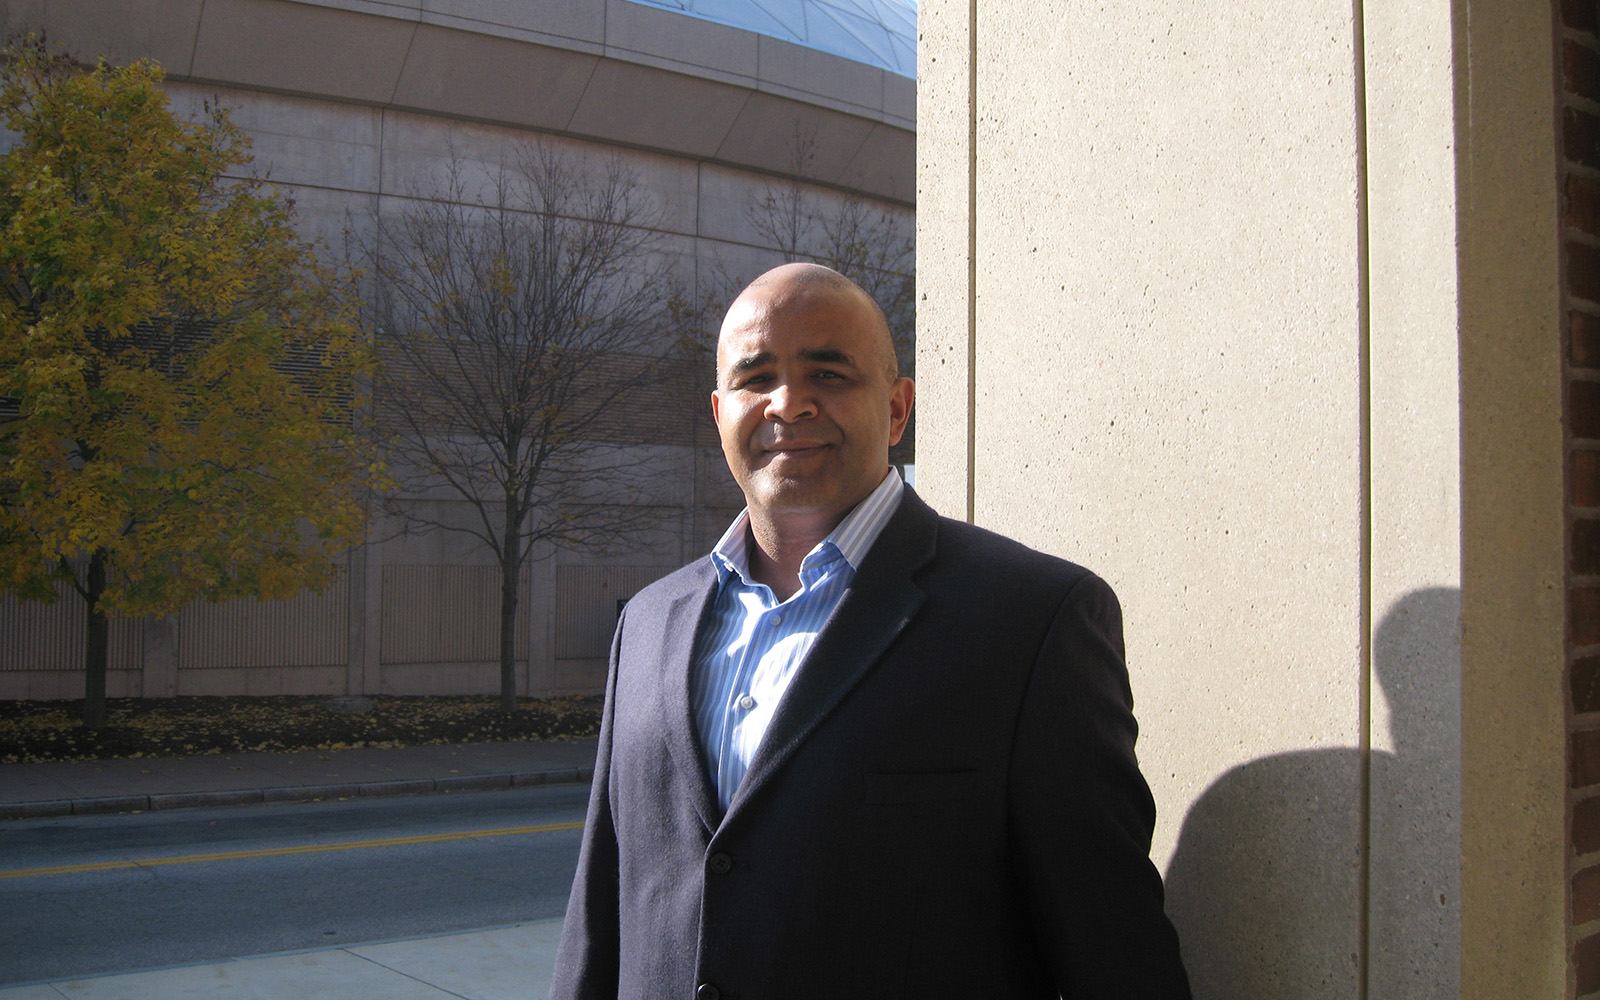 Jose Cruz of the UConn School of Business will be presented with the Service Excellence Award from the American Association of University Professors in April. (Nathan Oldham / UConn School of Business)